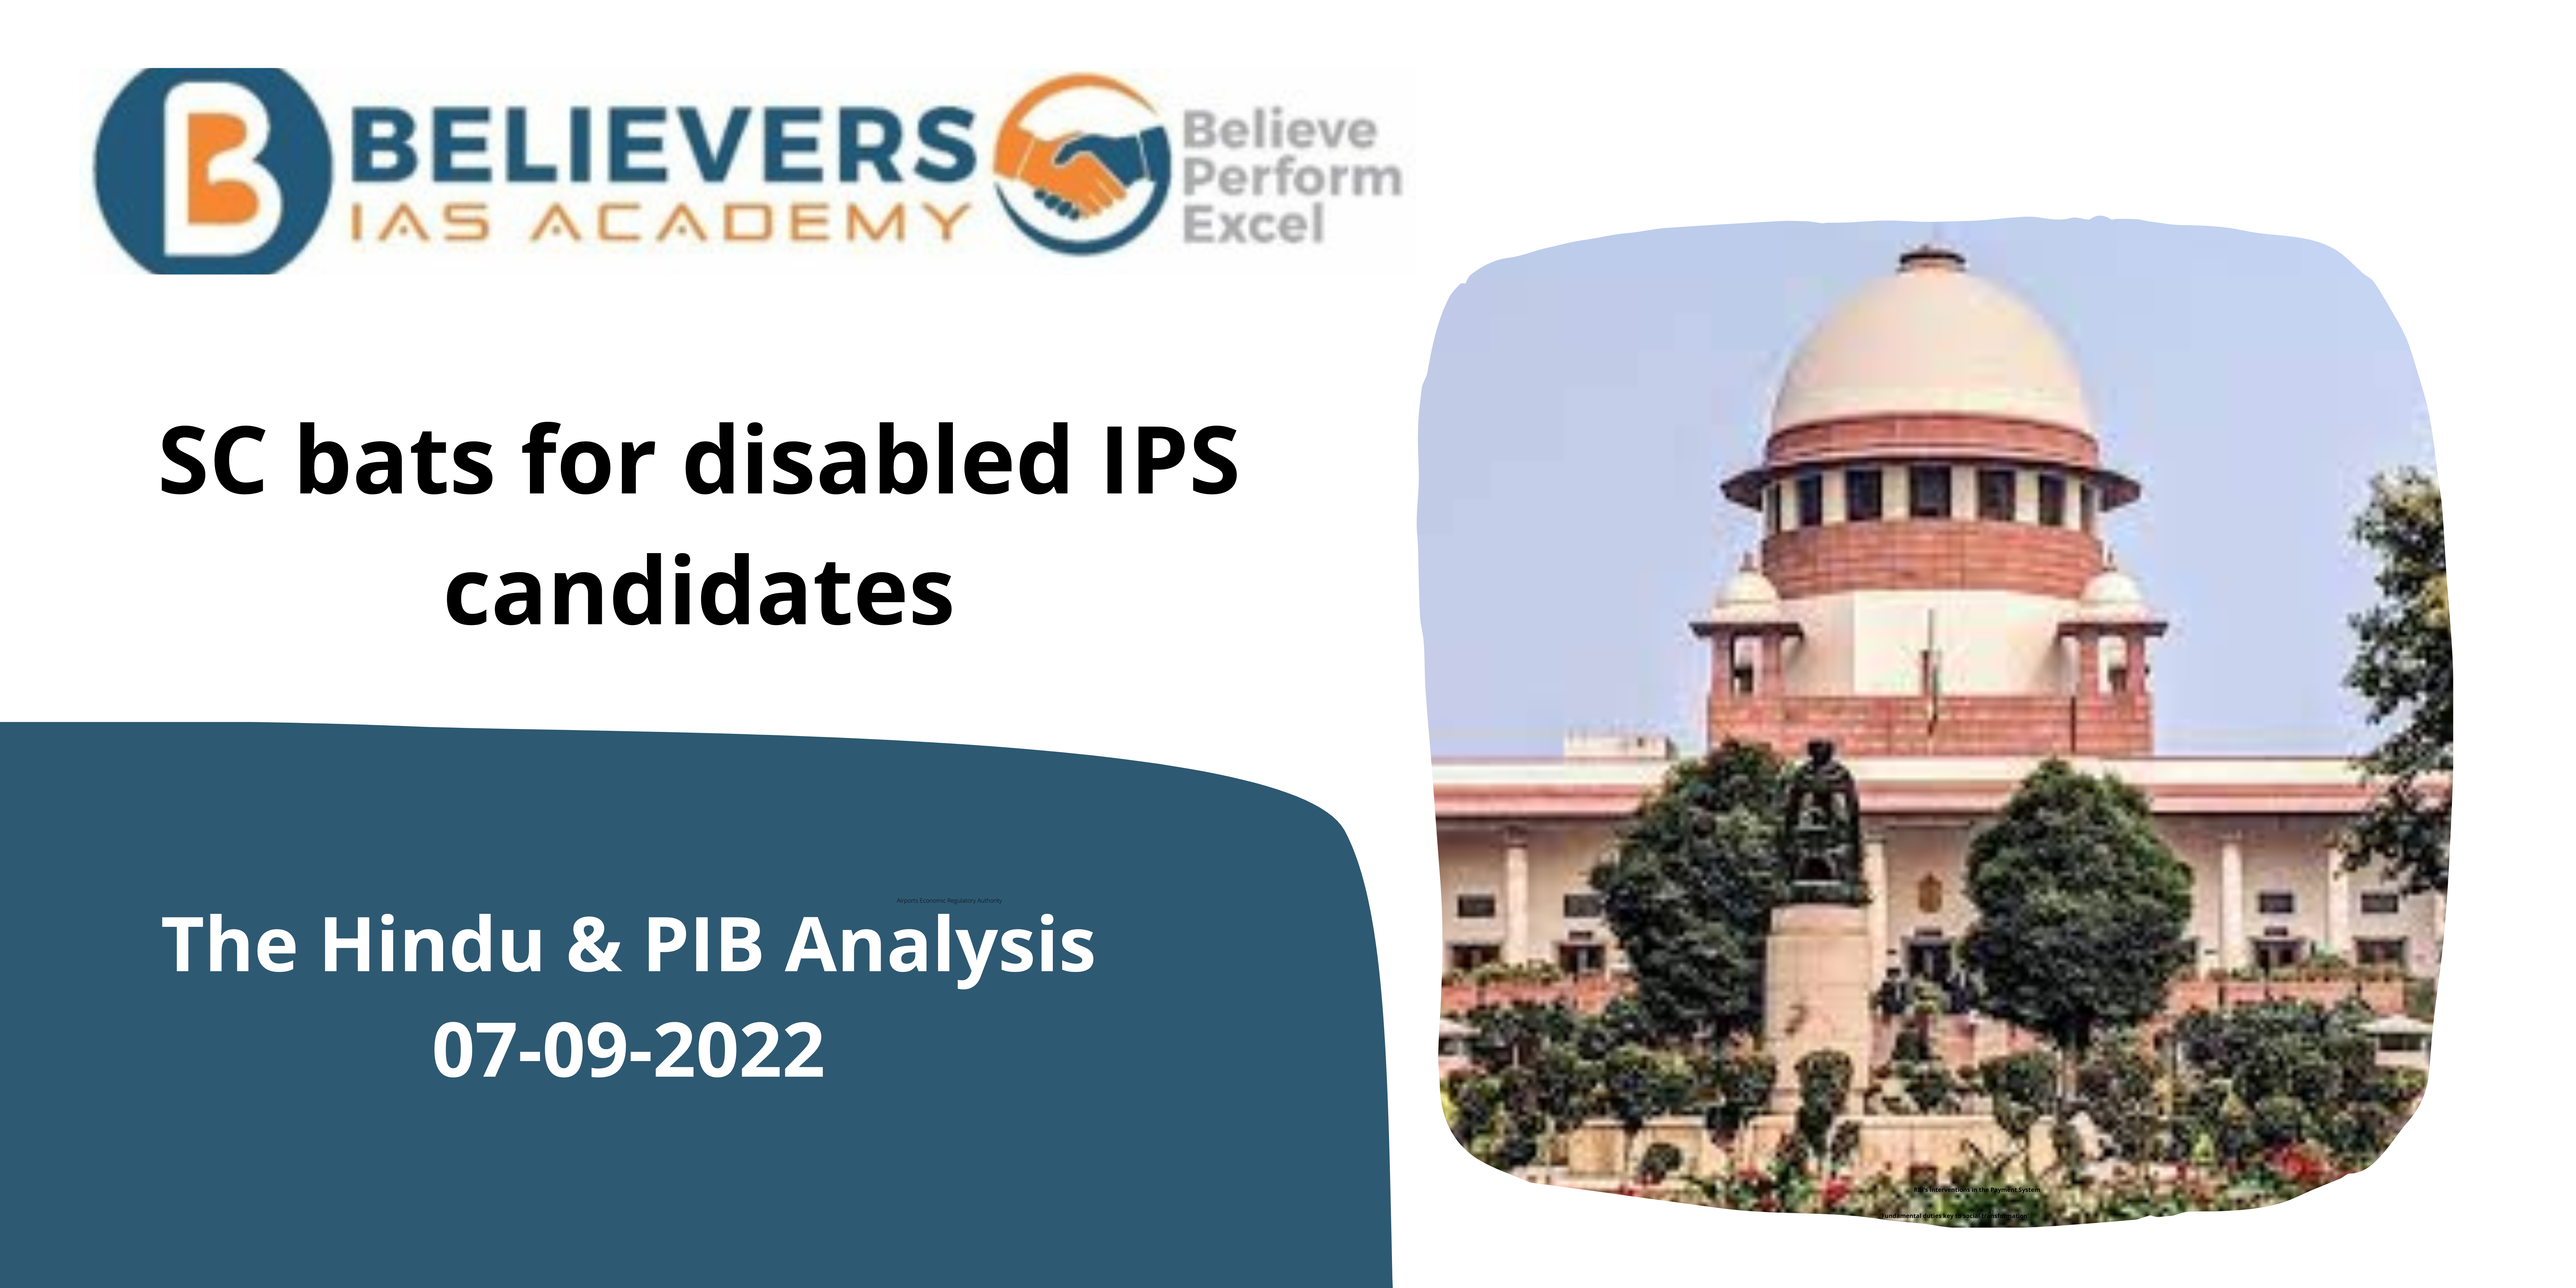 SC bats for disabled IPS candidates